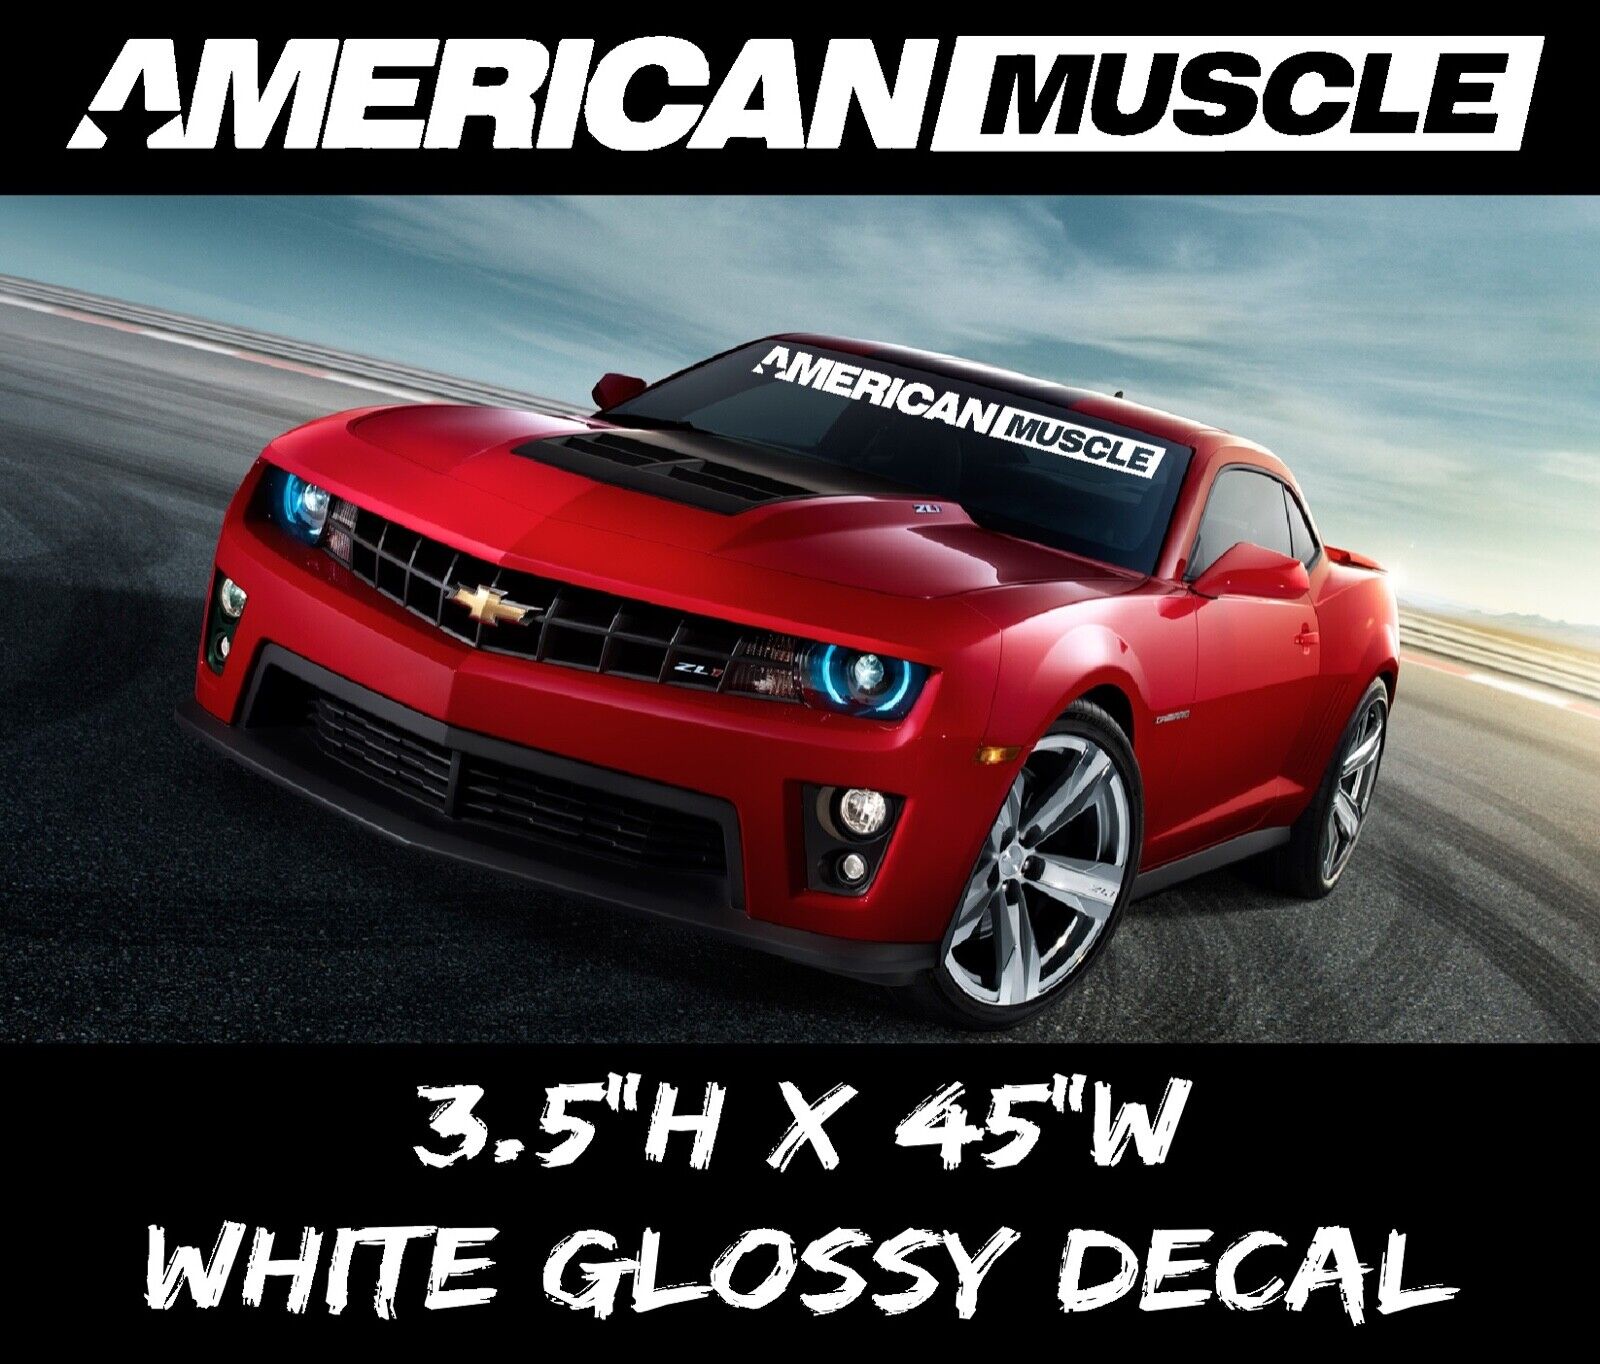 AMERICAN MUSCLE CAR MURICA Windshield Banner Premium Decal Sticker Racing US 341